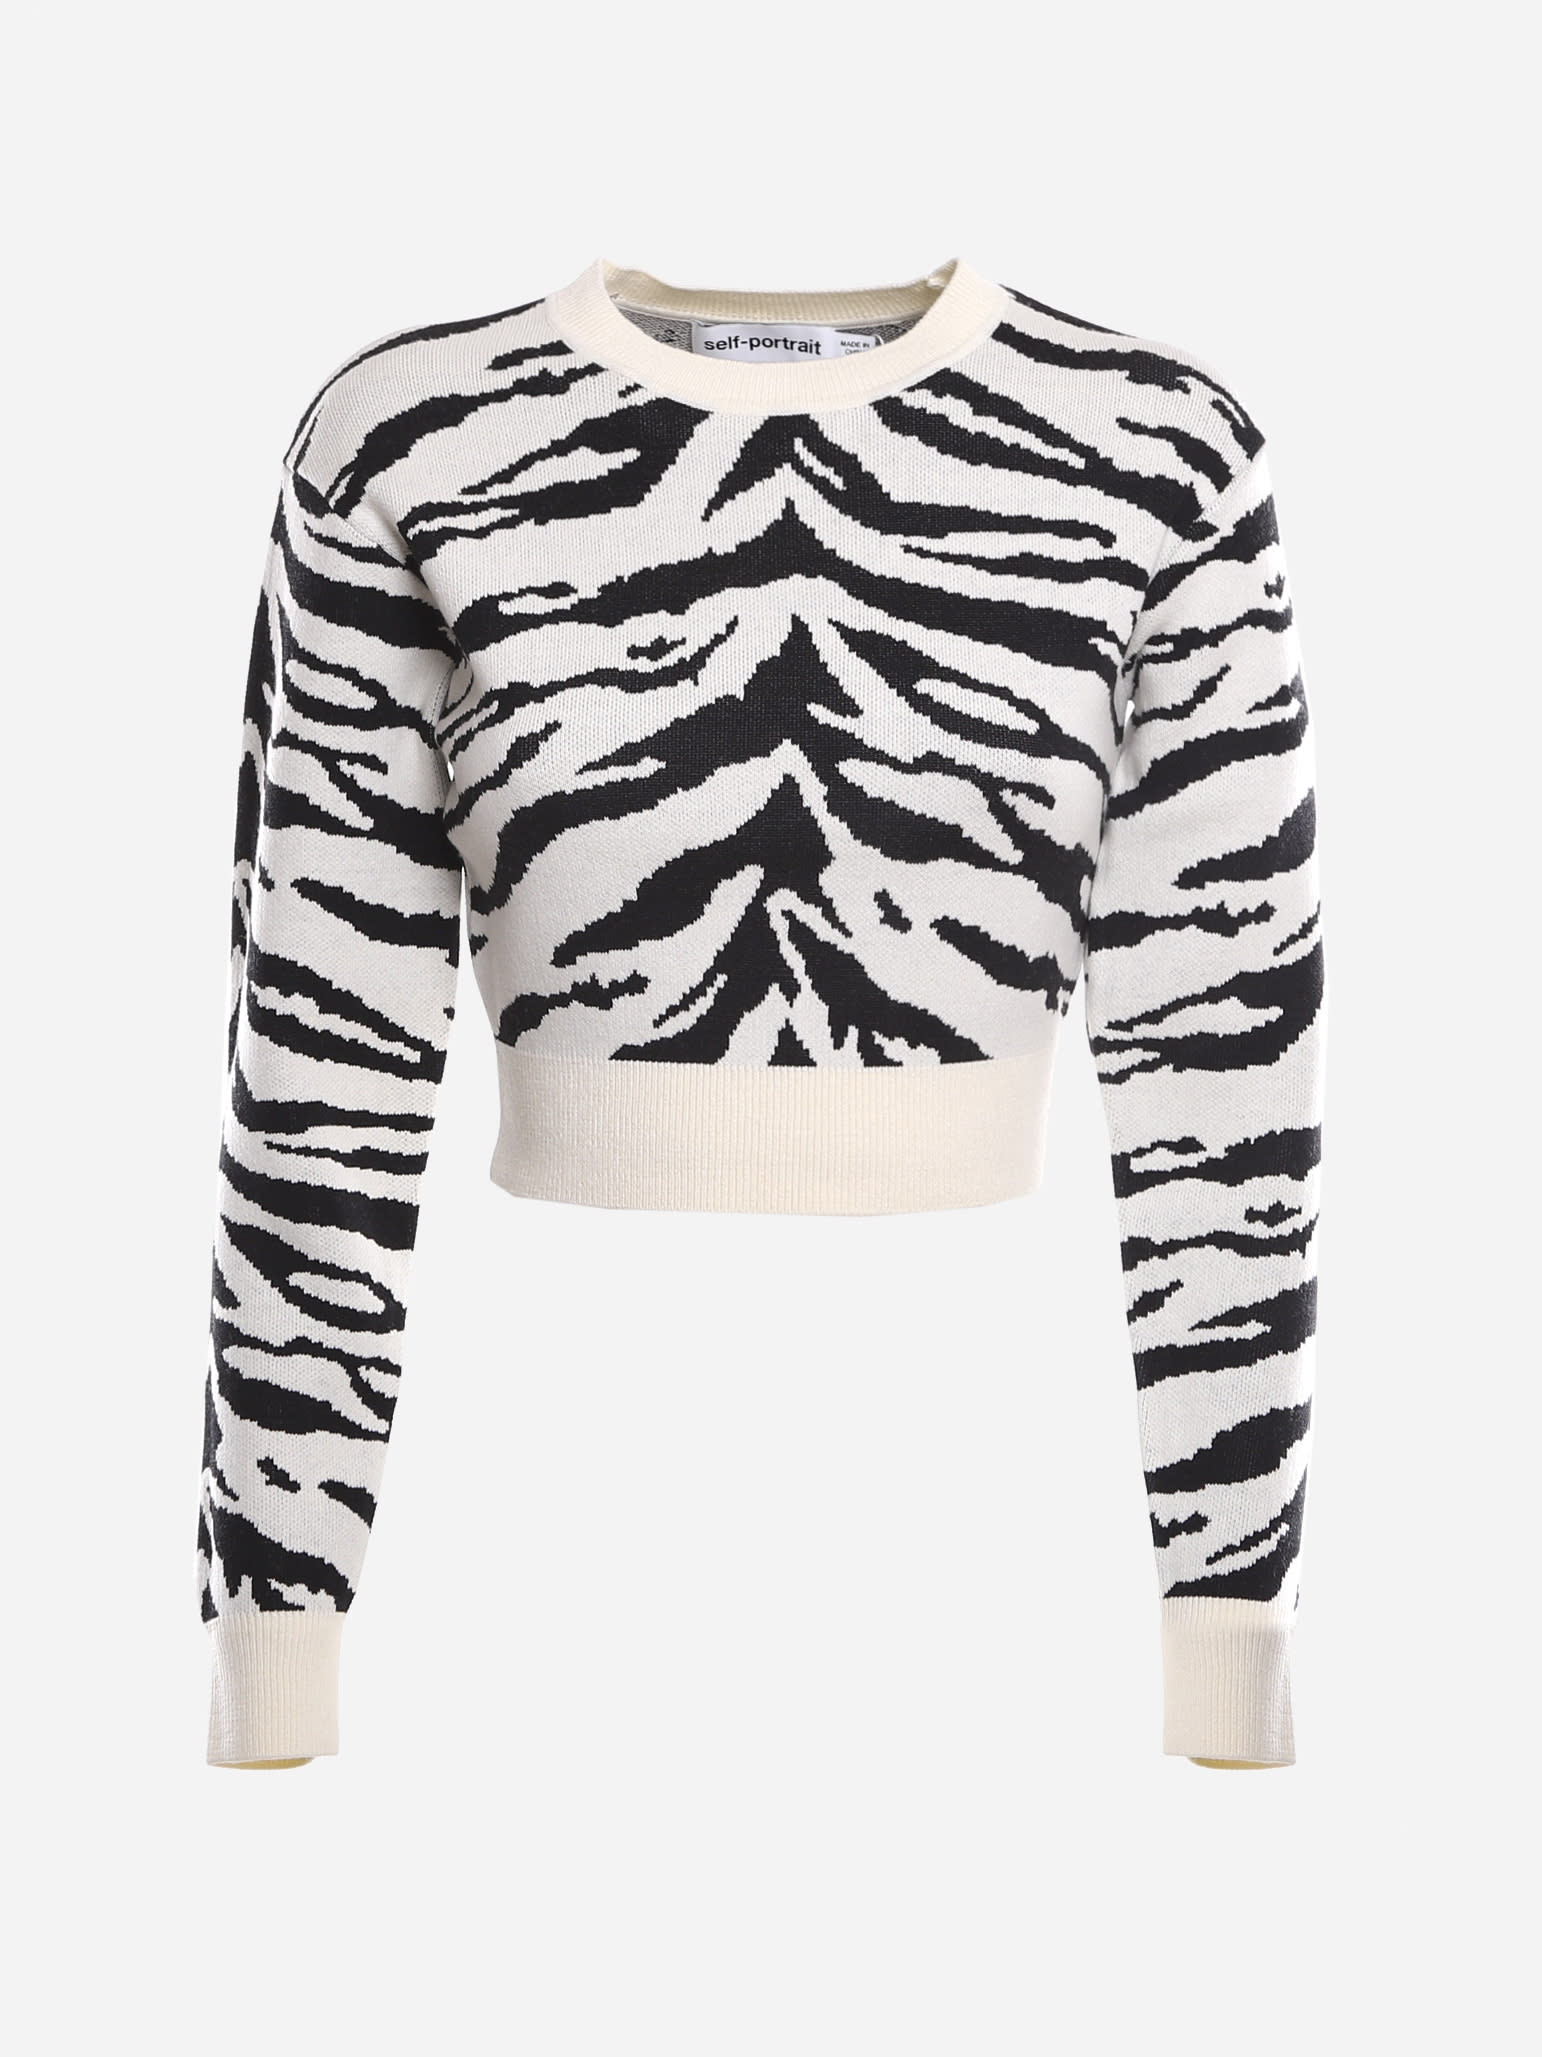 self-portrait Cropped Sweater With All-over Inlay Zebra Pattern